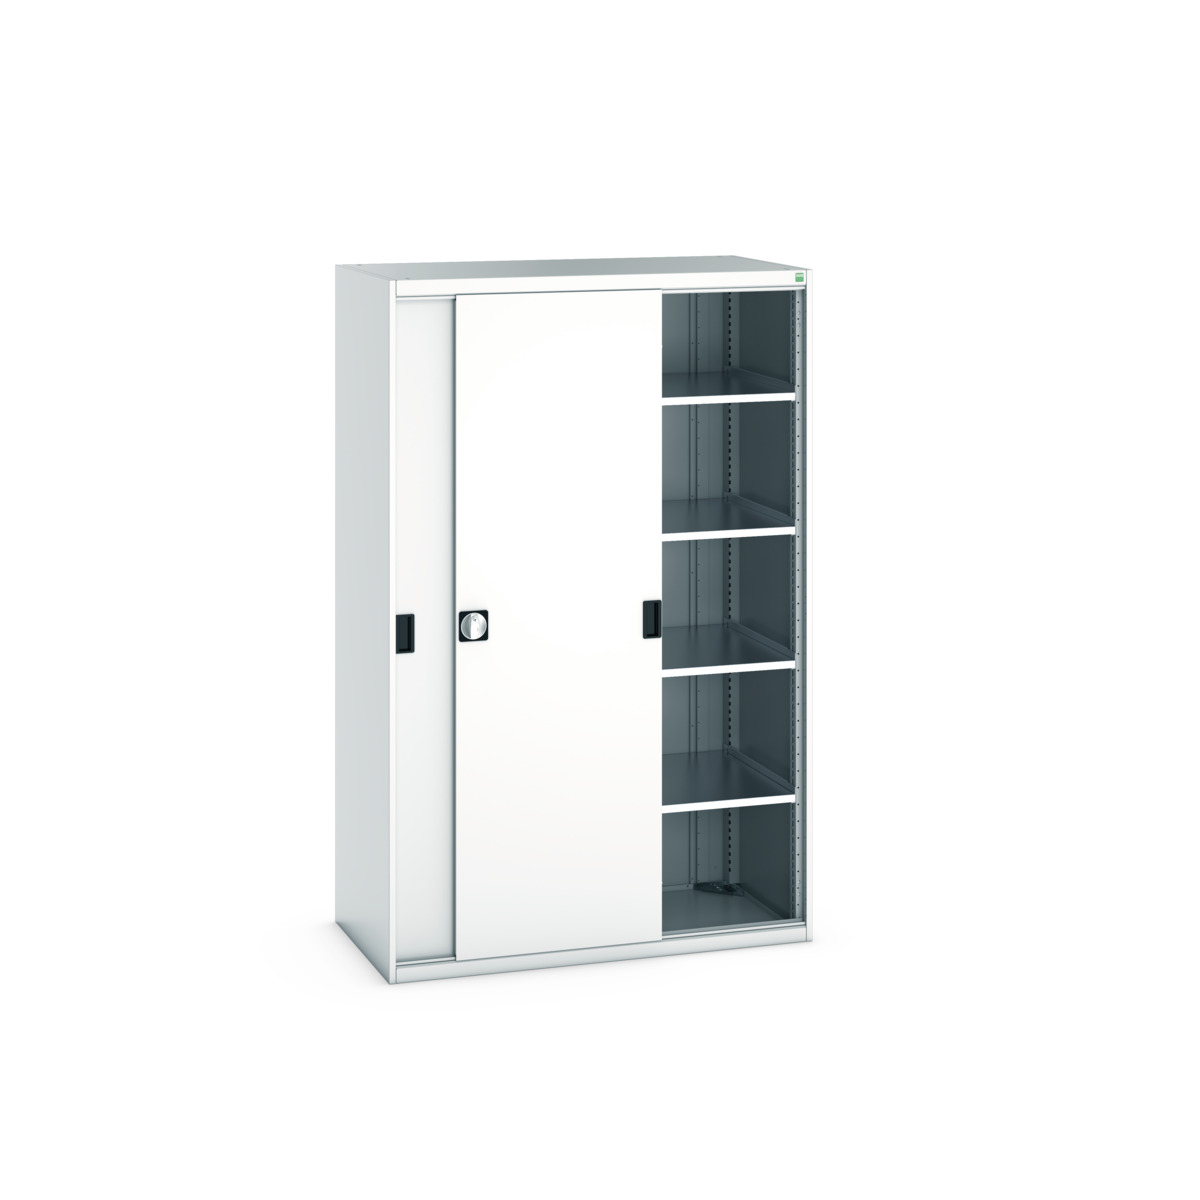 40022065.16V - cubio armoire SMS-13620-1.2